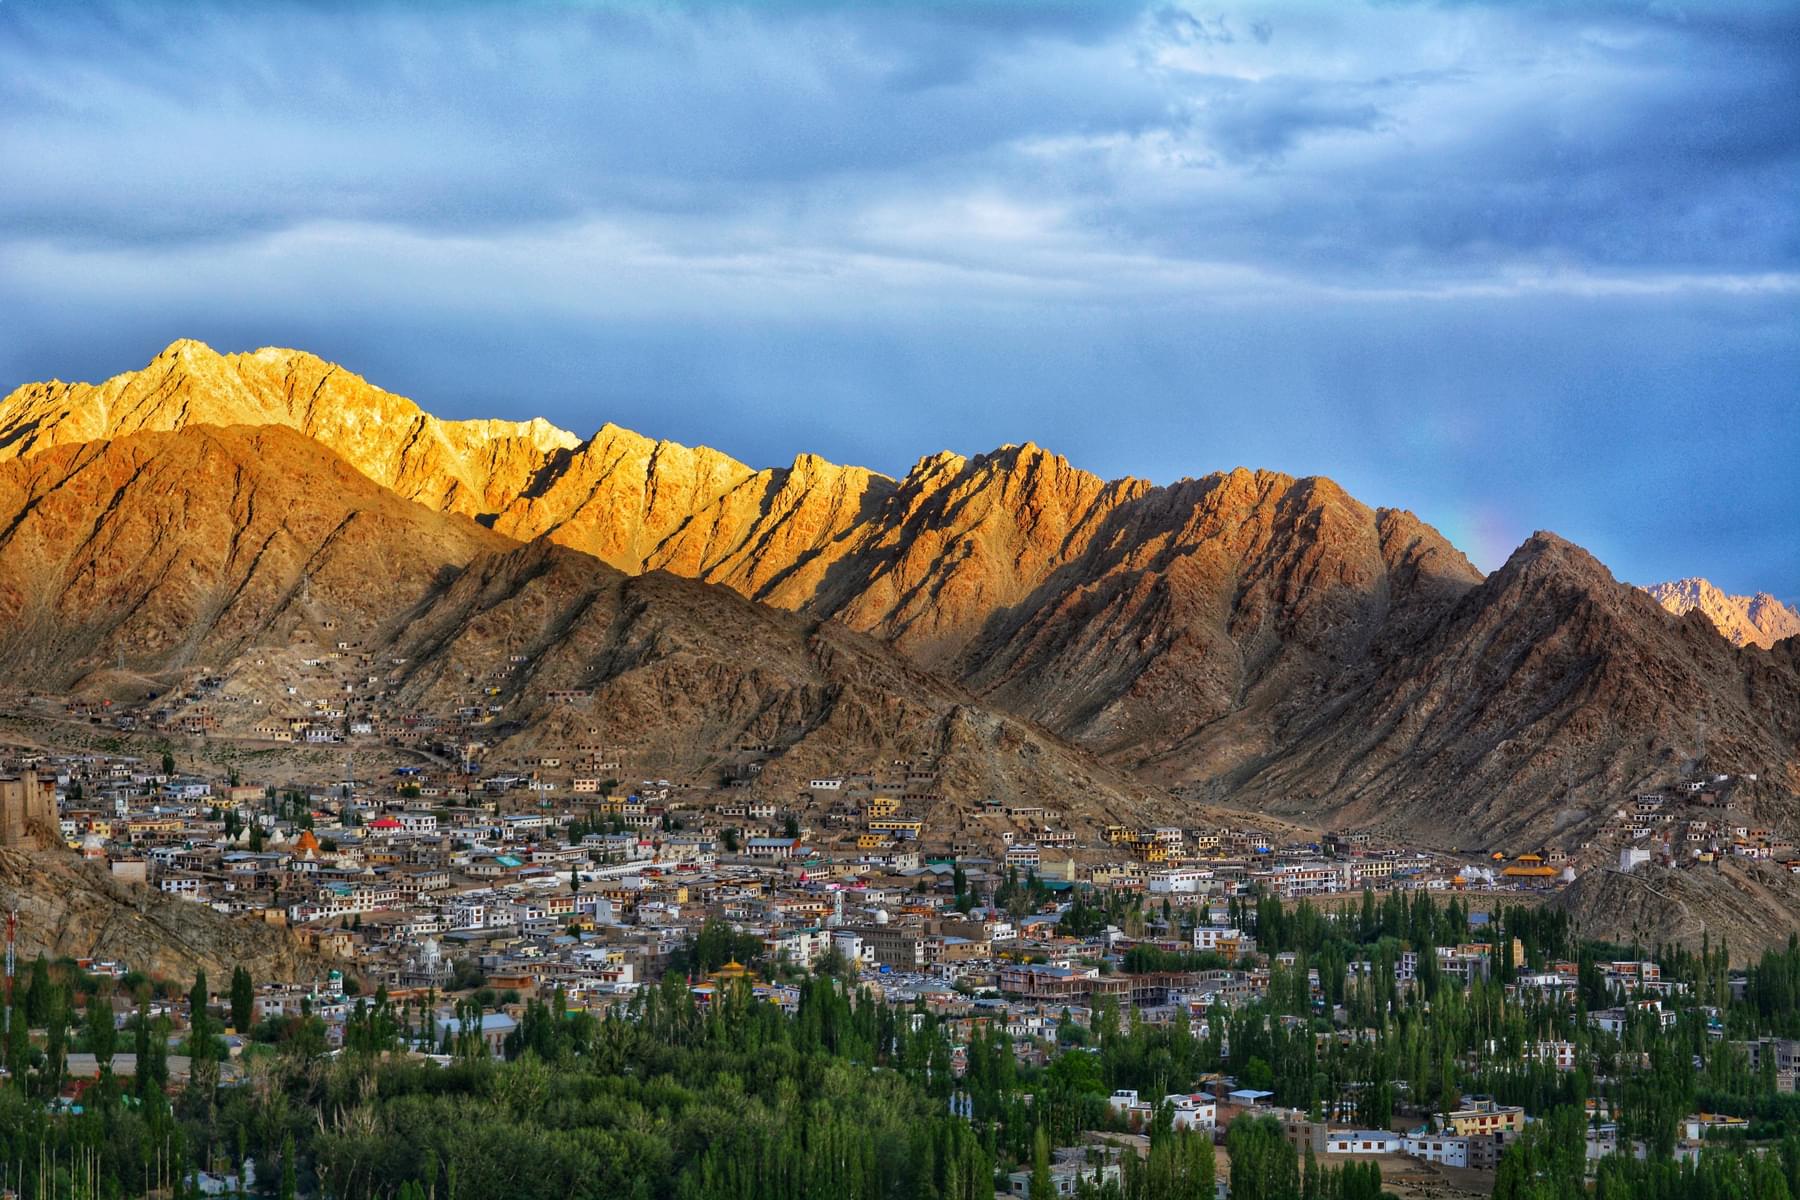 Soak in the magnificent views of the capital city of Leh from the mountain peaks